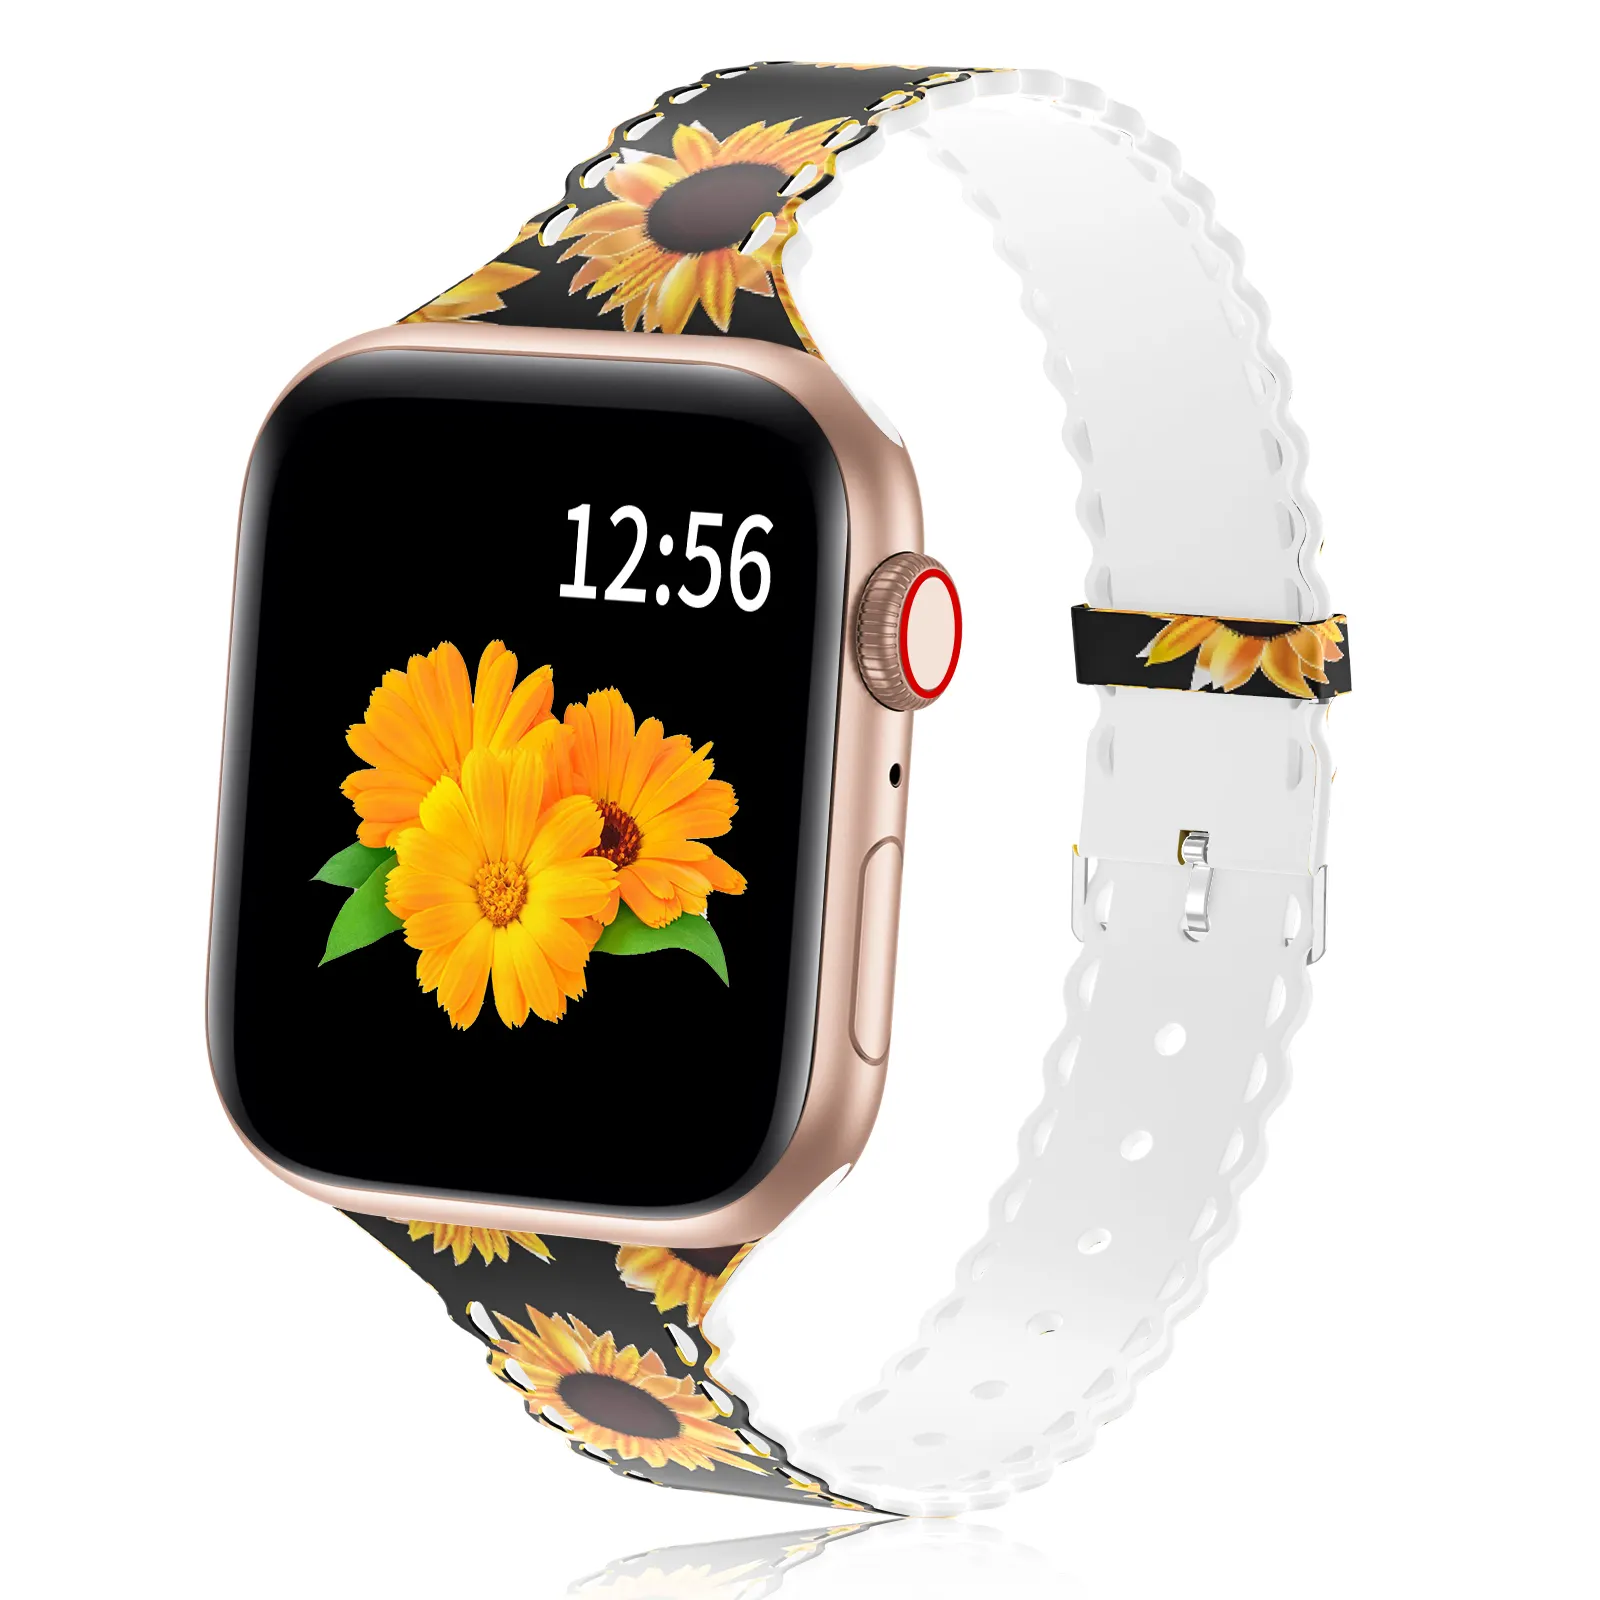 Elegant Fadeless Floral Thin Narrow Sport Replacement Strap Wristband For Printed Apple IWatch Series 5/4/3/2/1 Women Men